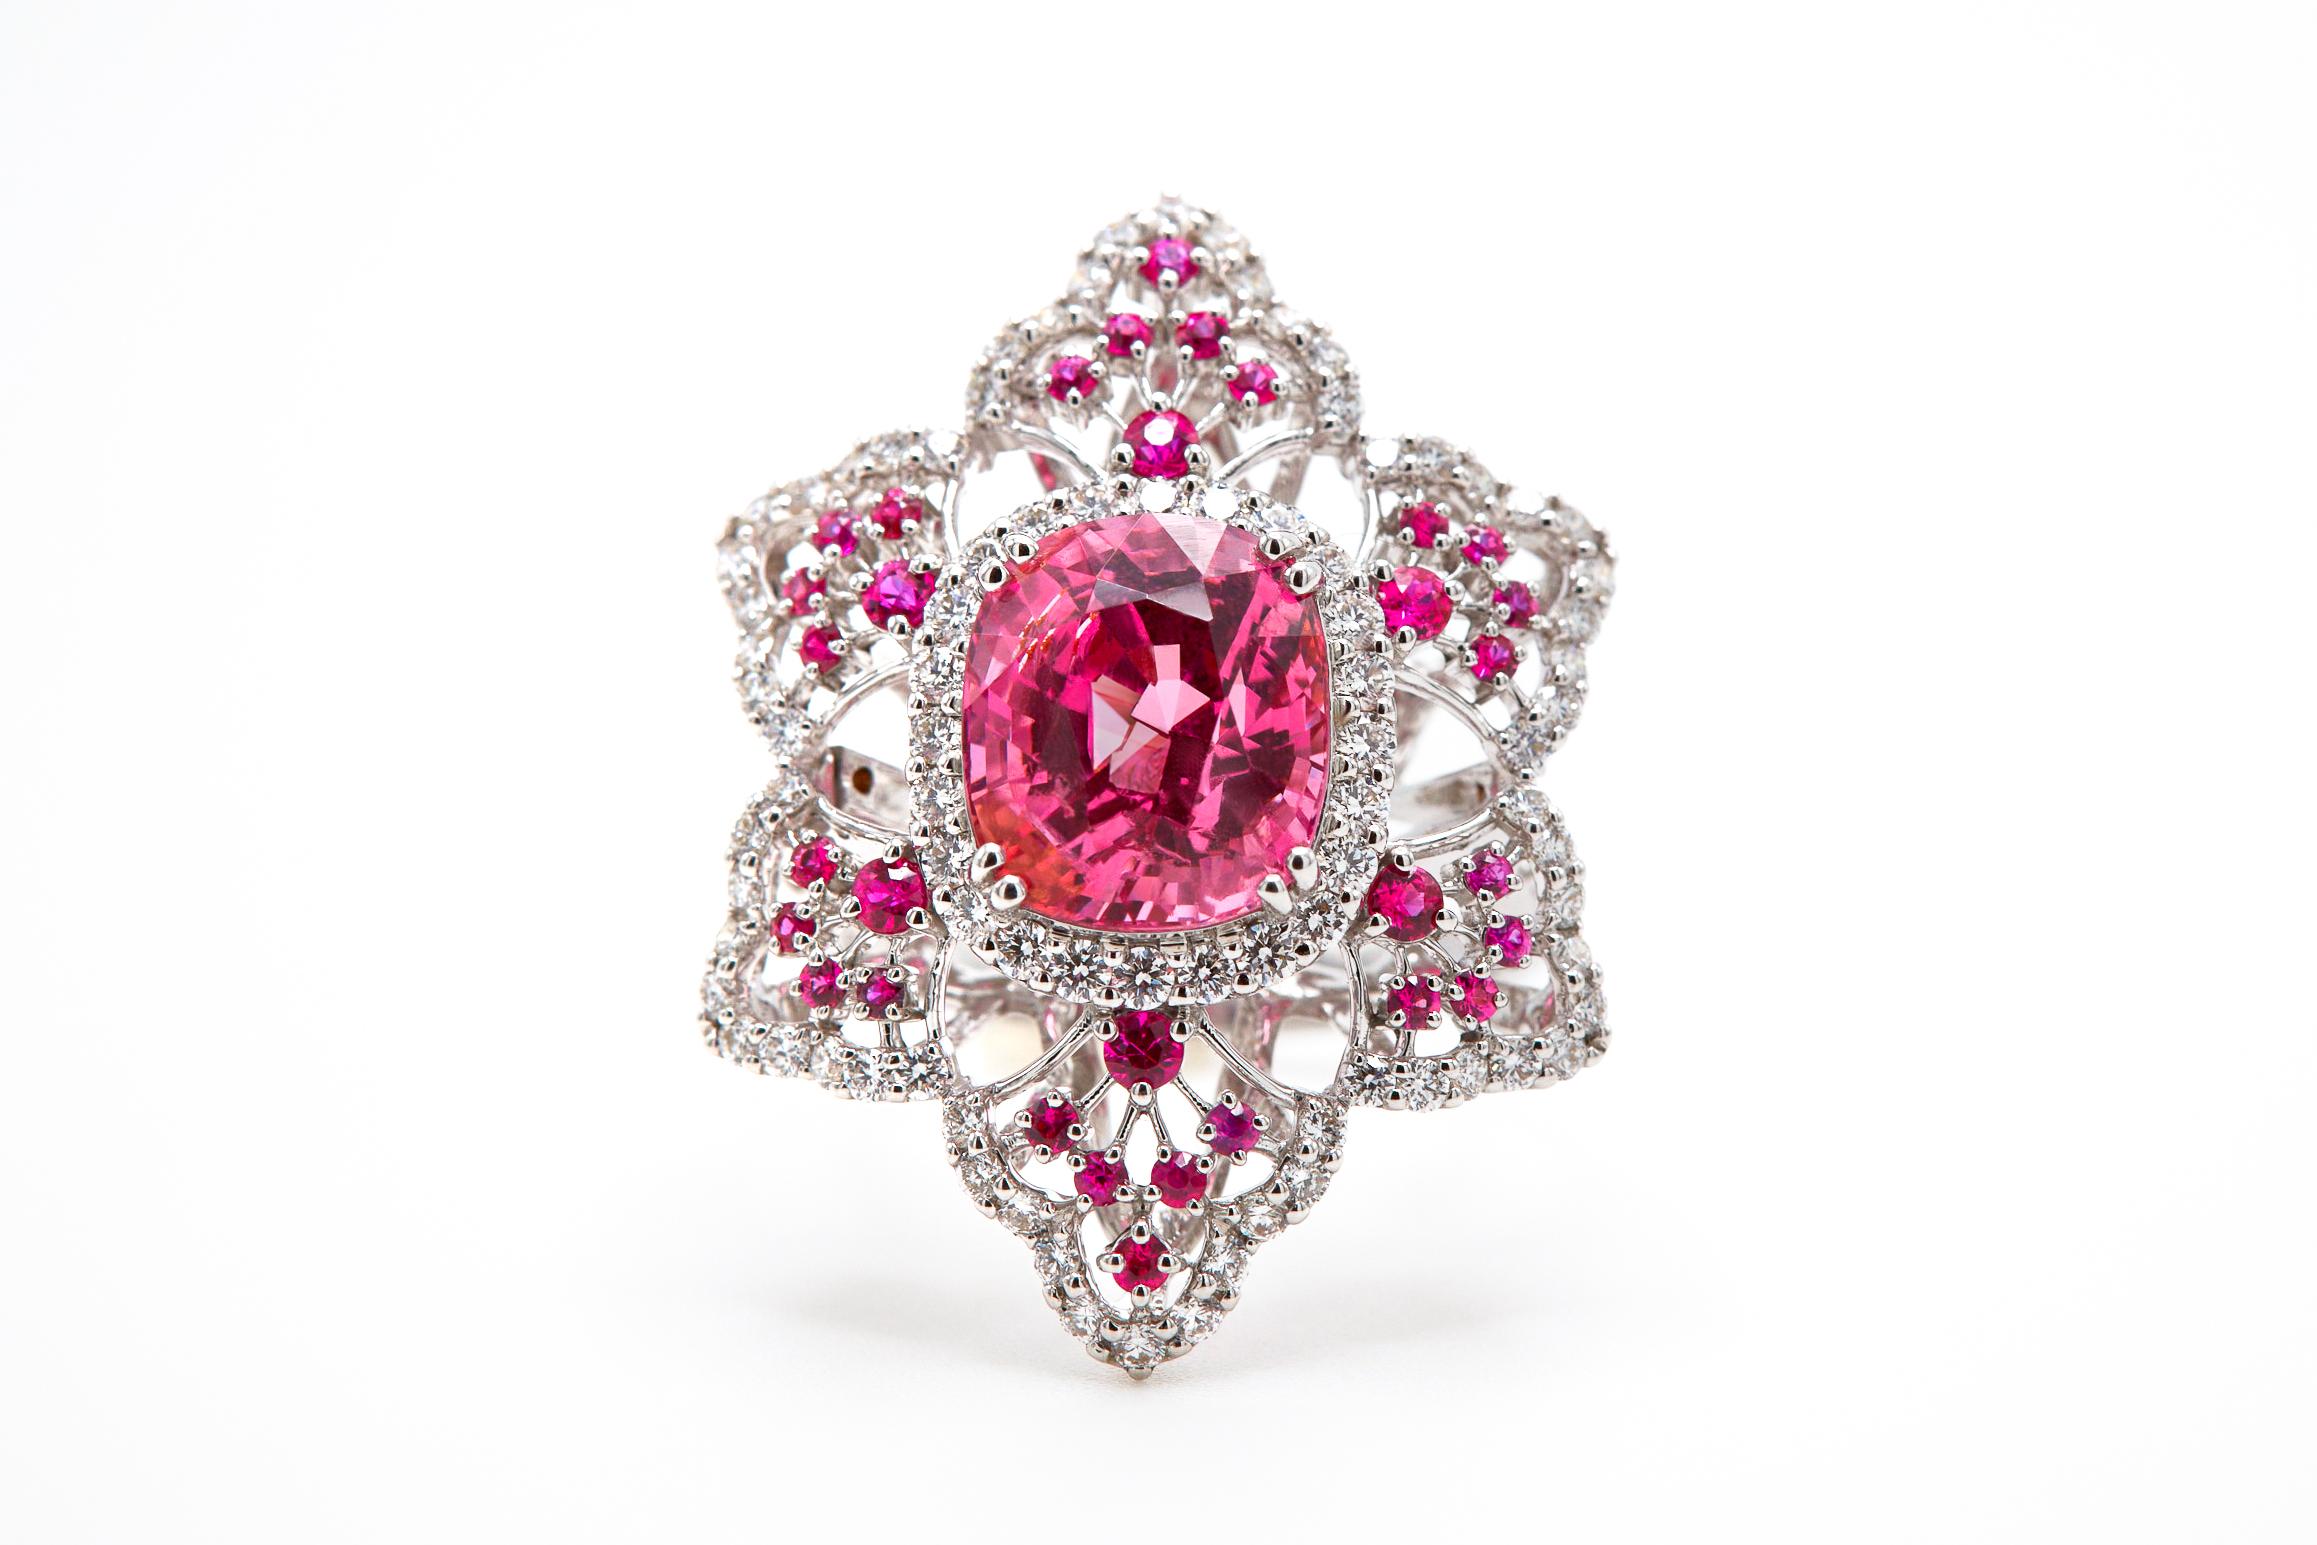 18K WHITE GOLD 
94 DIAMONDS   1.13 CARATS
32 NO-HEAT BURMA RUBIES  0.53 CARATS 
1 NO-HEAT BURMESE PINK SPINEL  5.64 CARATS

Experience unparalleled luxury with our exquisite The Barbie Spinel ring. Featuring a 5.46 carat pink Spinel from Burma, this